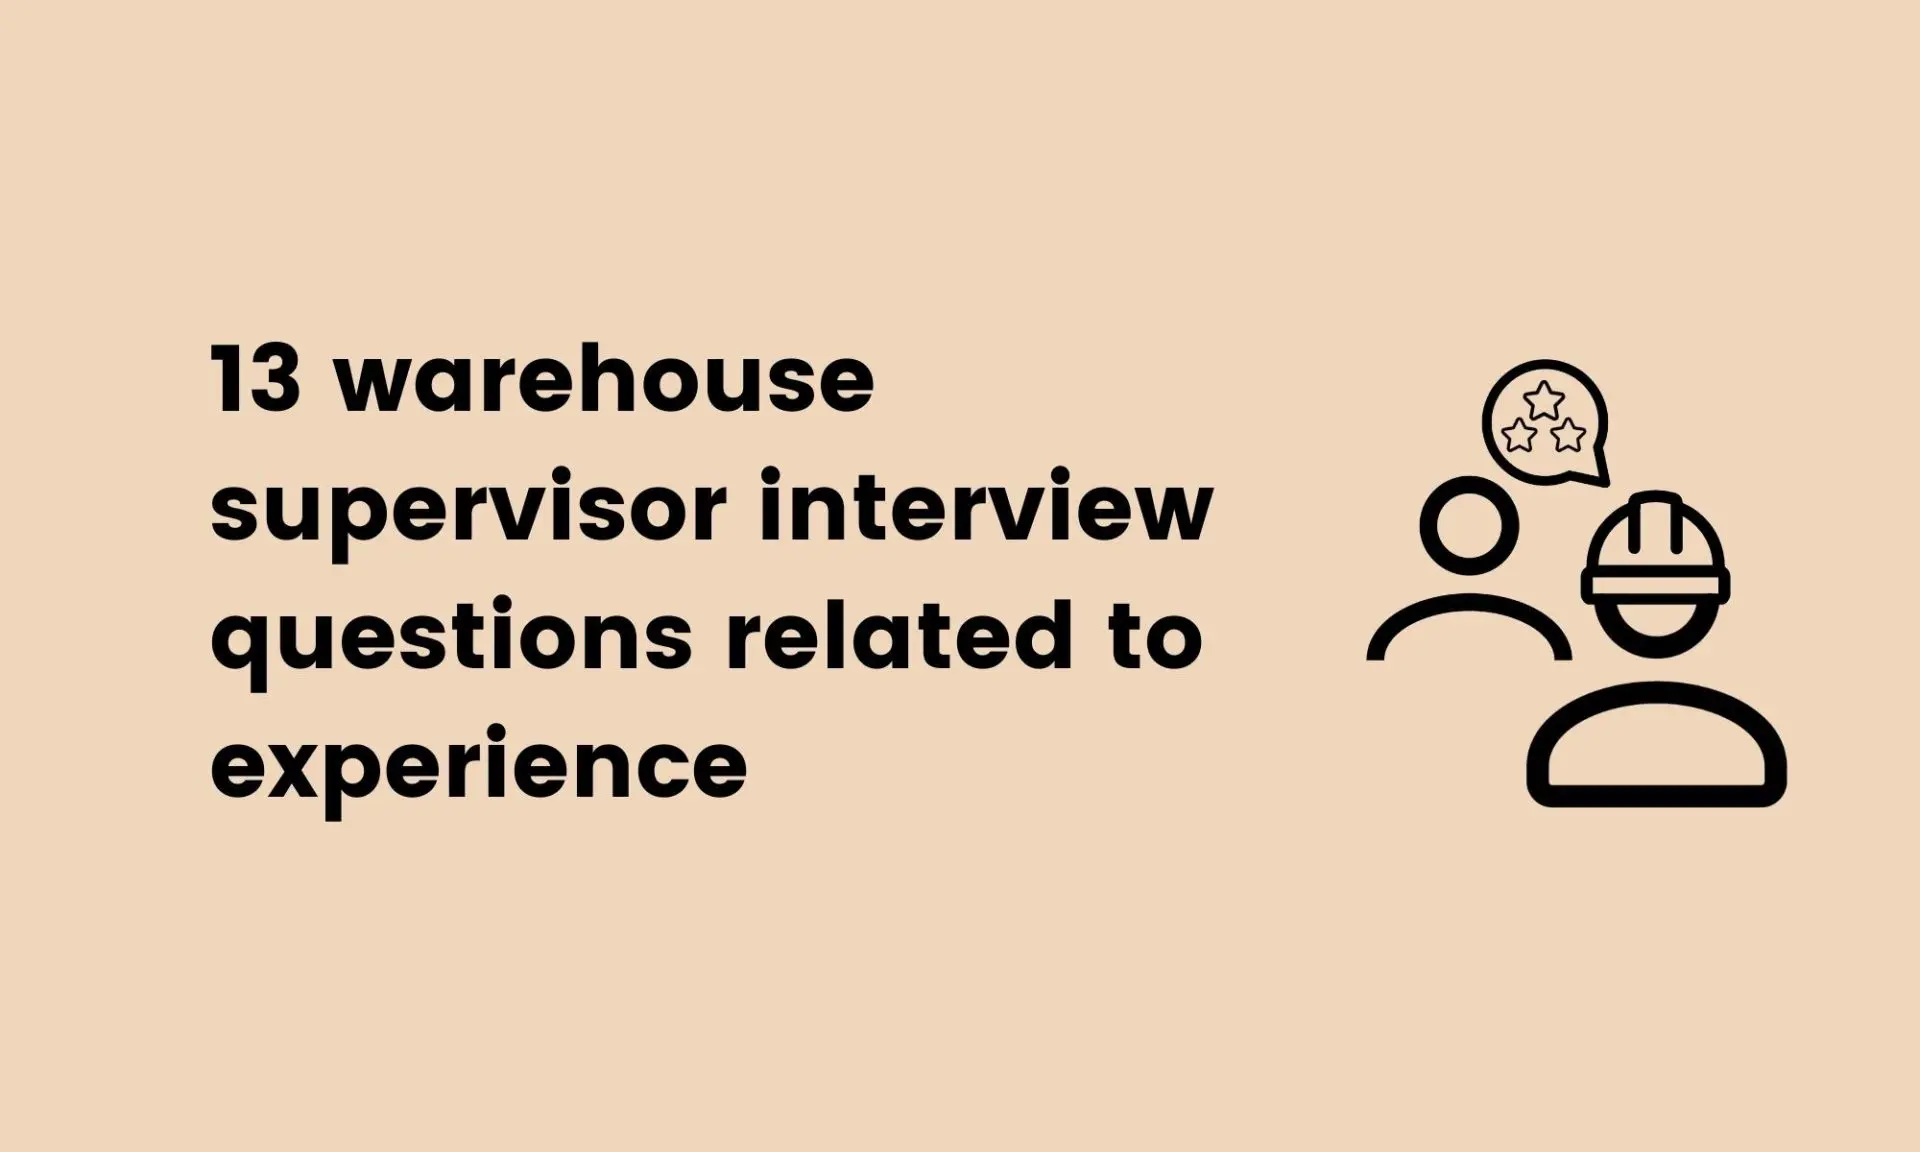 banner image for warehouse supervisor interview questions related to experience